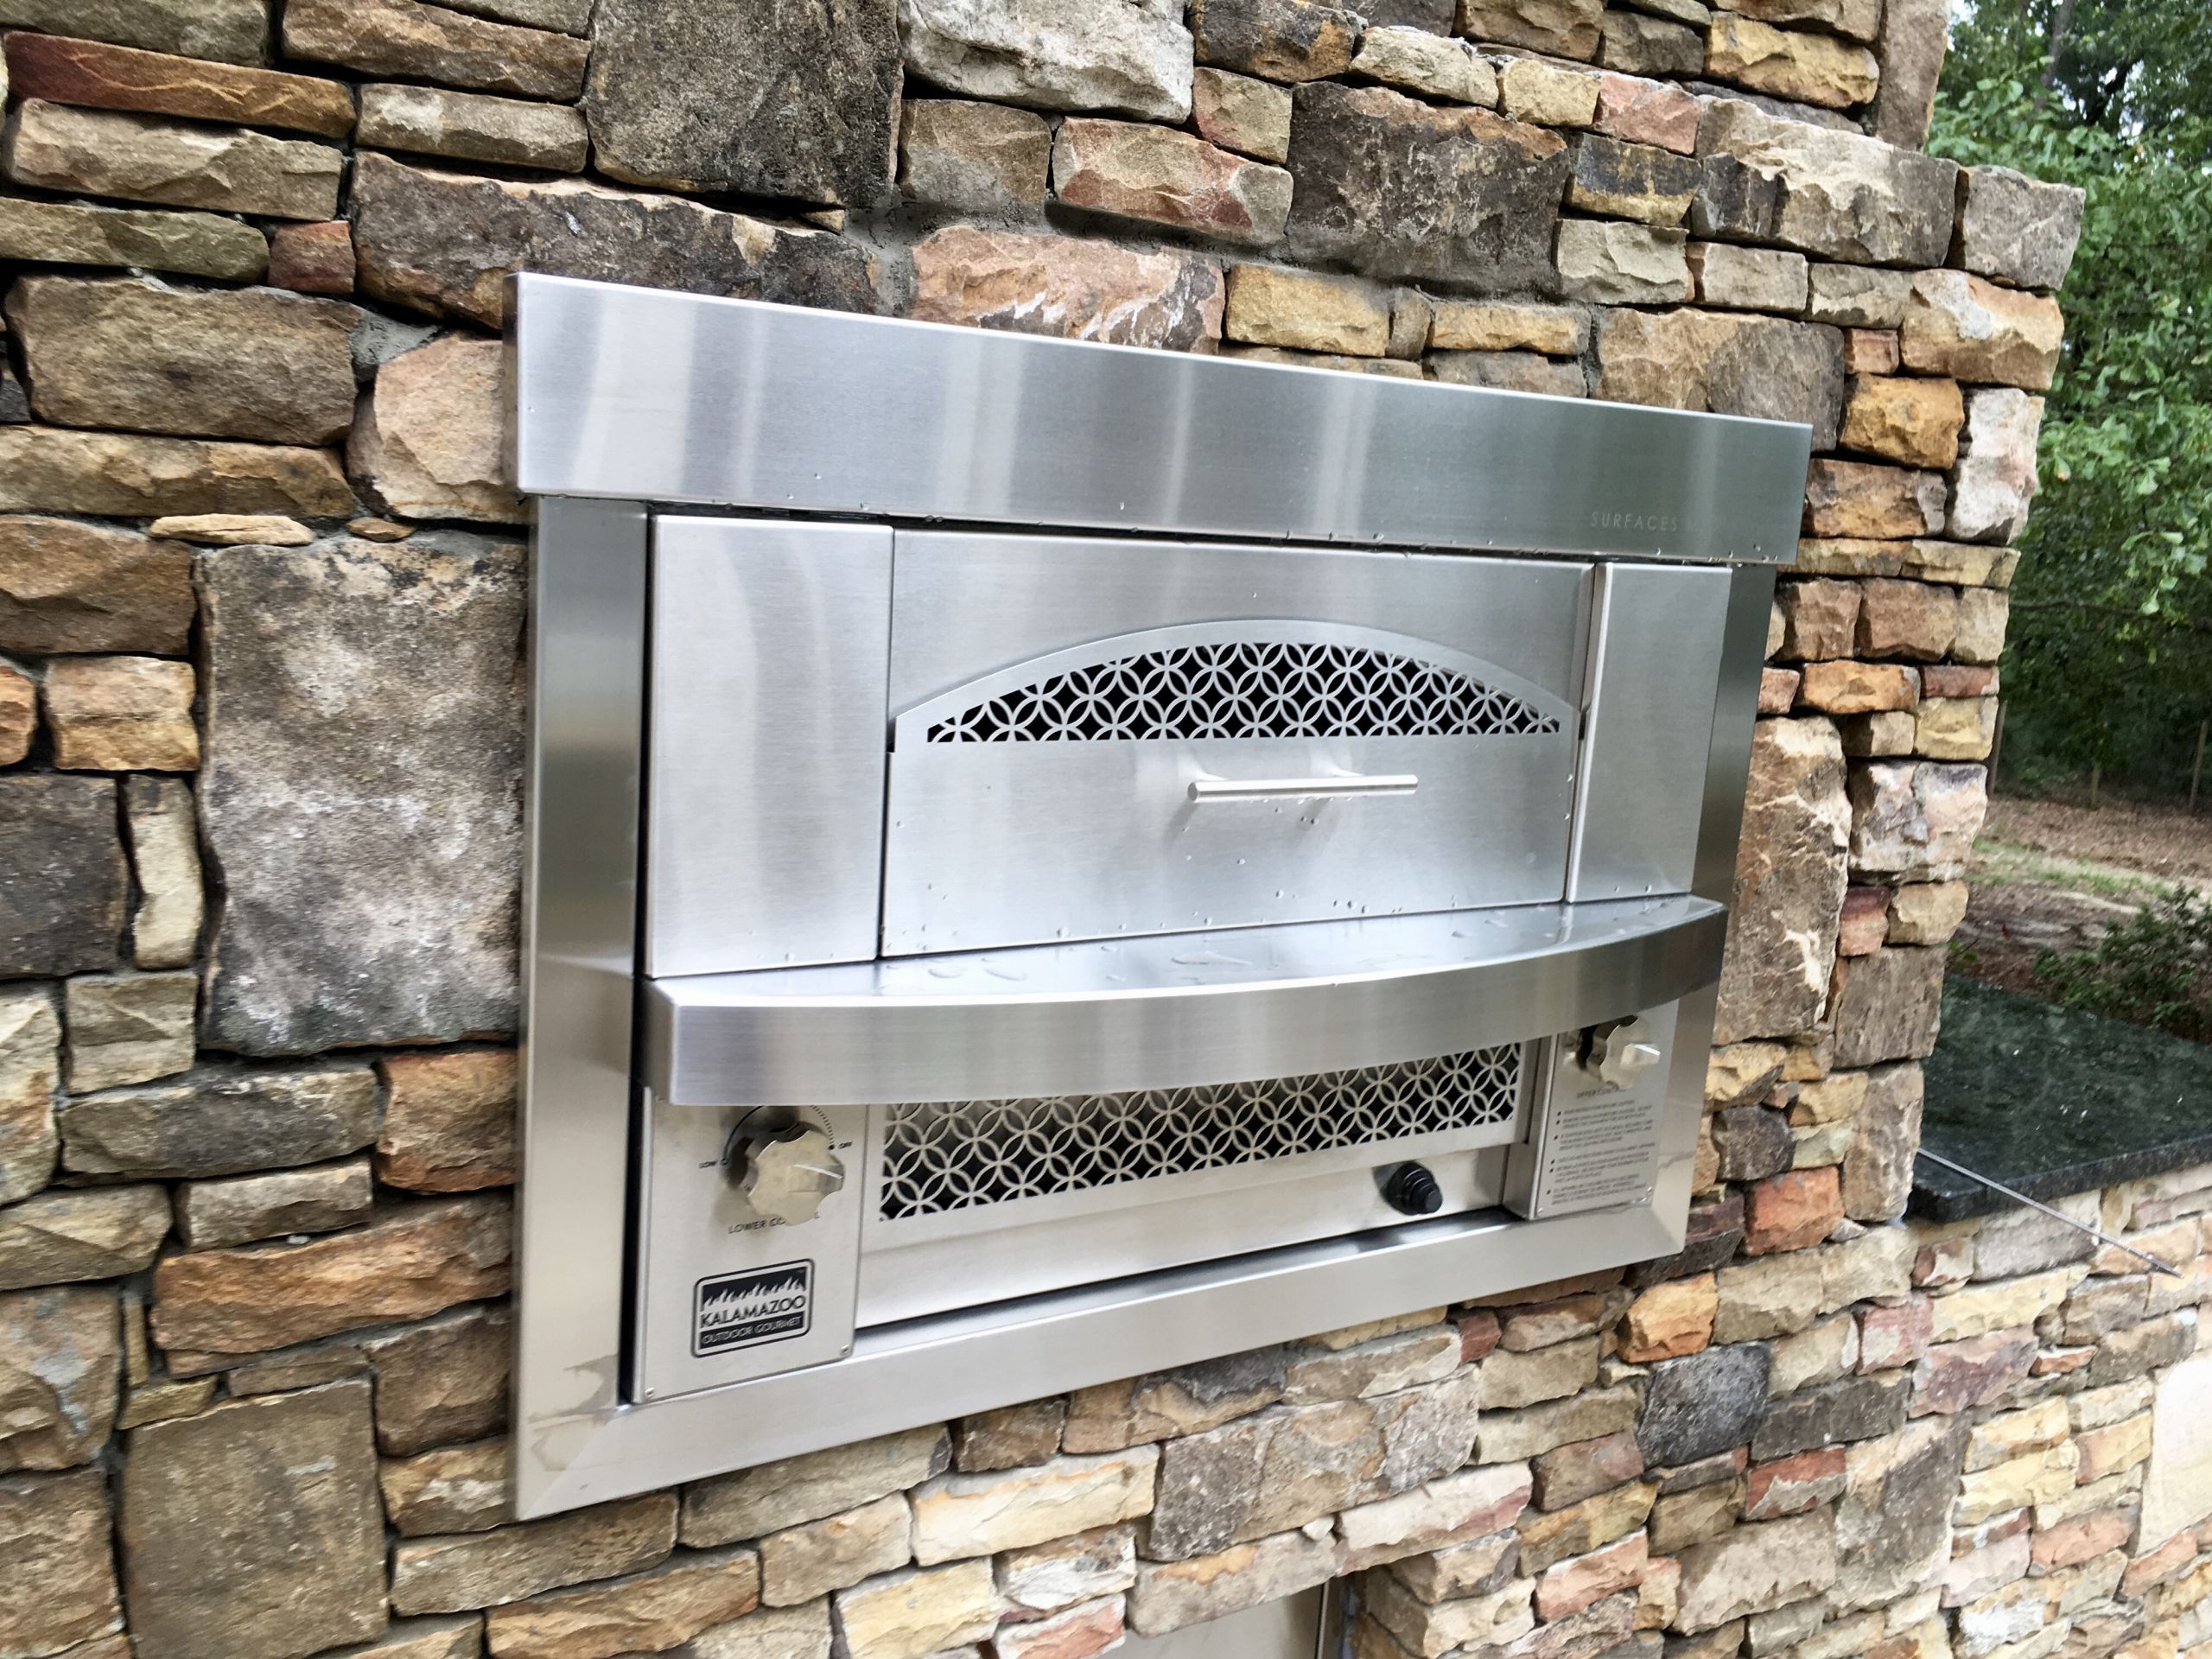 Outdoor Kitchen With Pizza Oven
 Outdoor Kitchen Built in Gas Pizza Oven Fireside